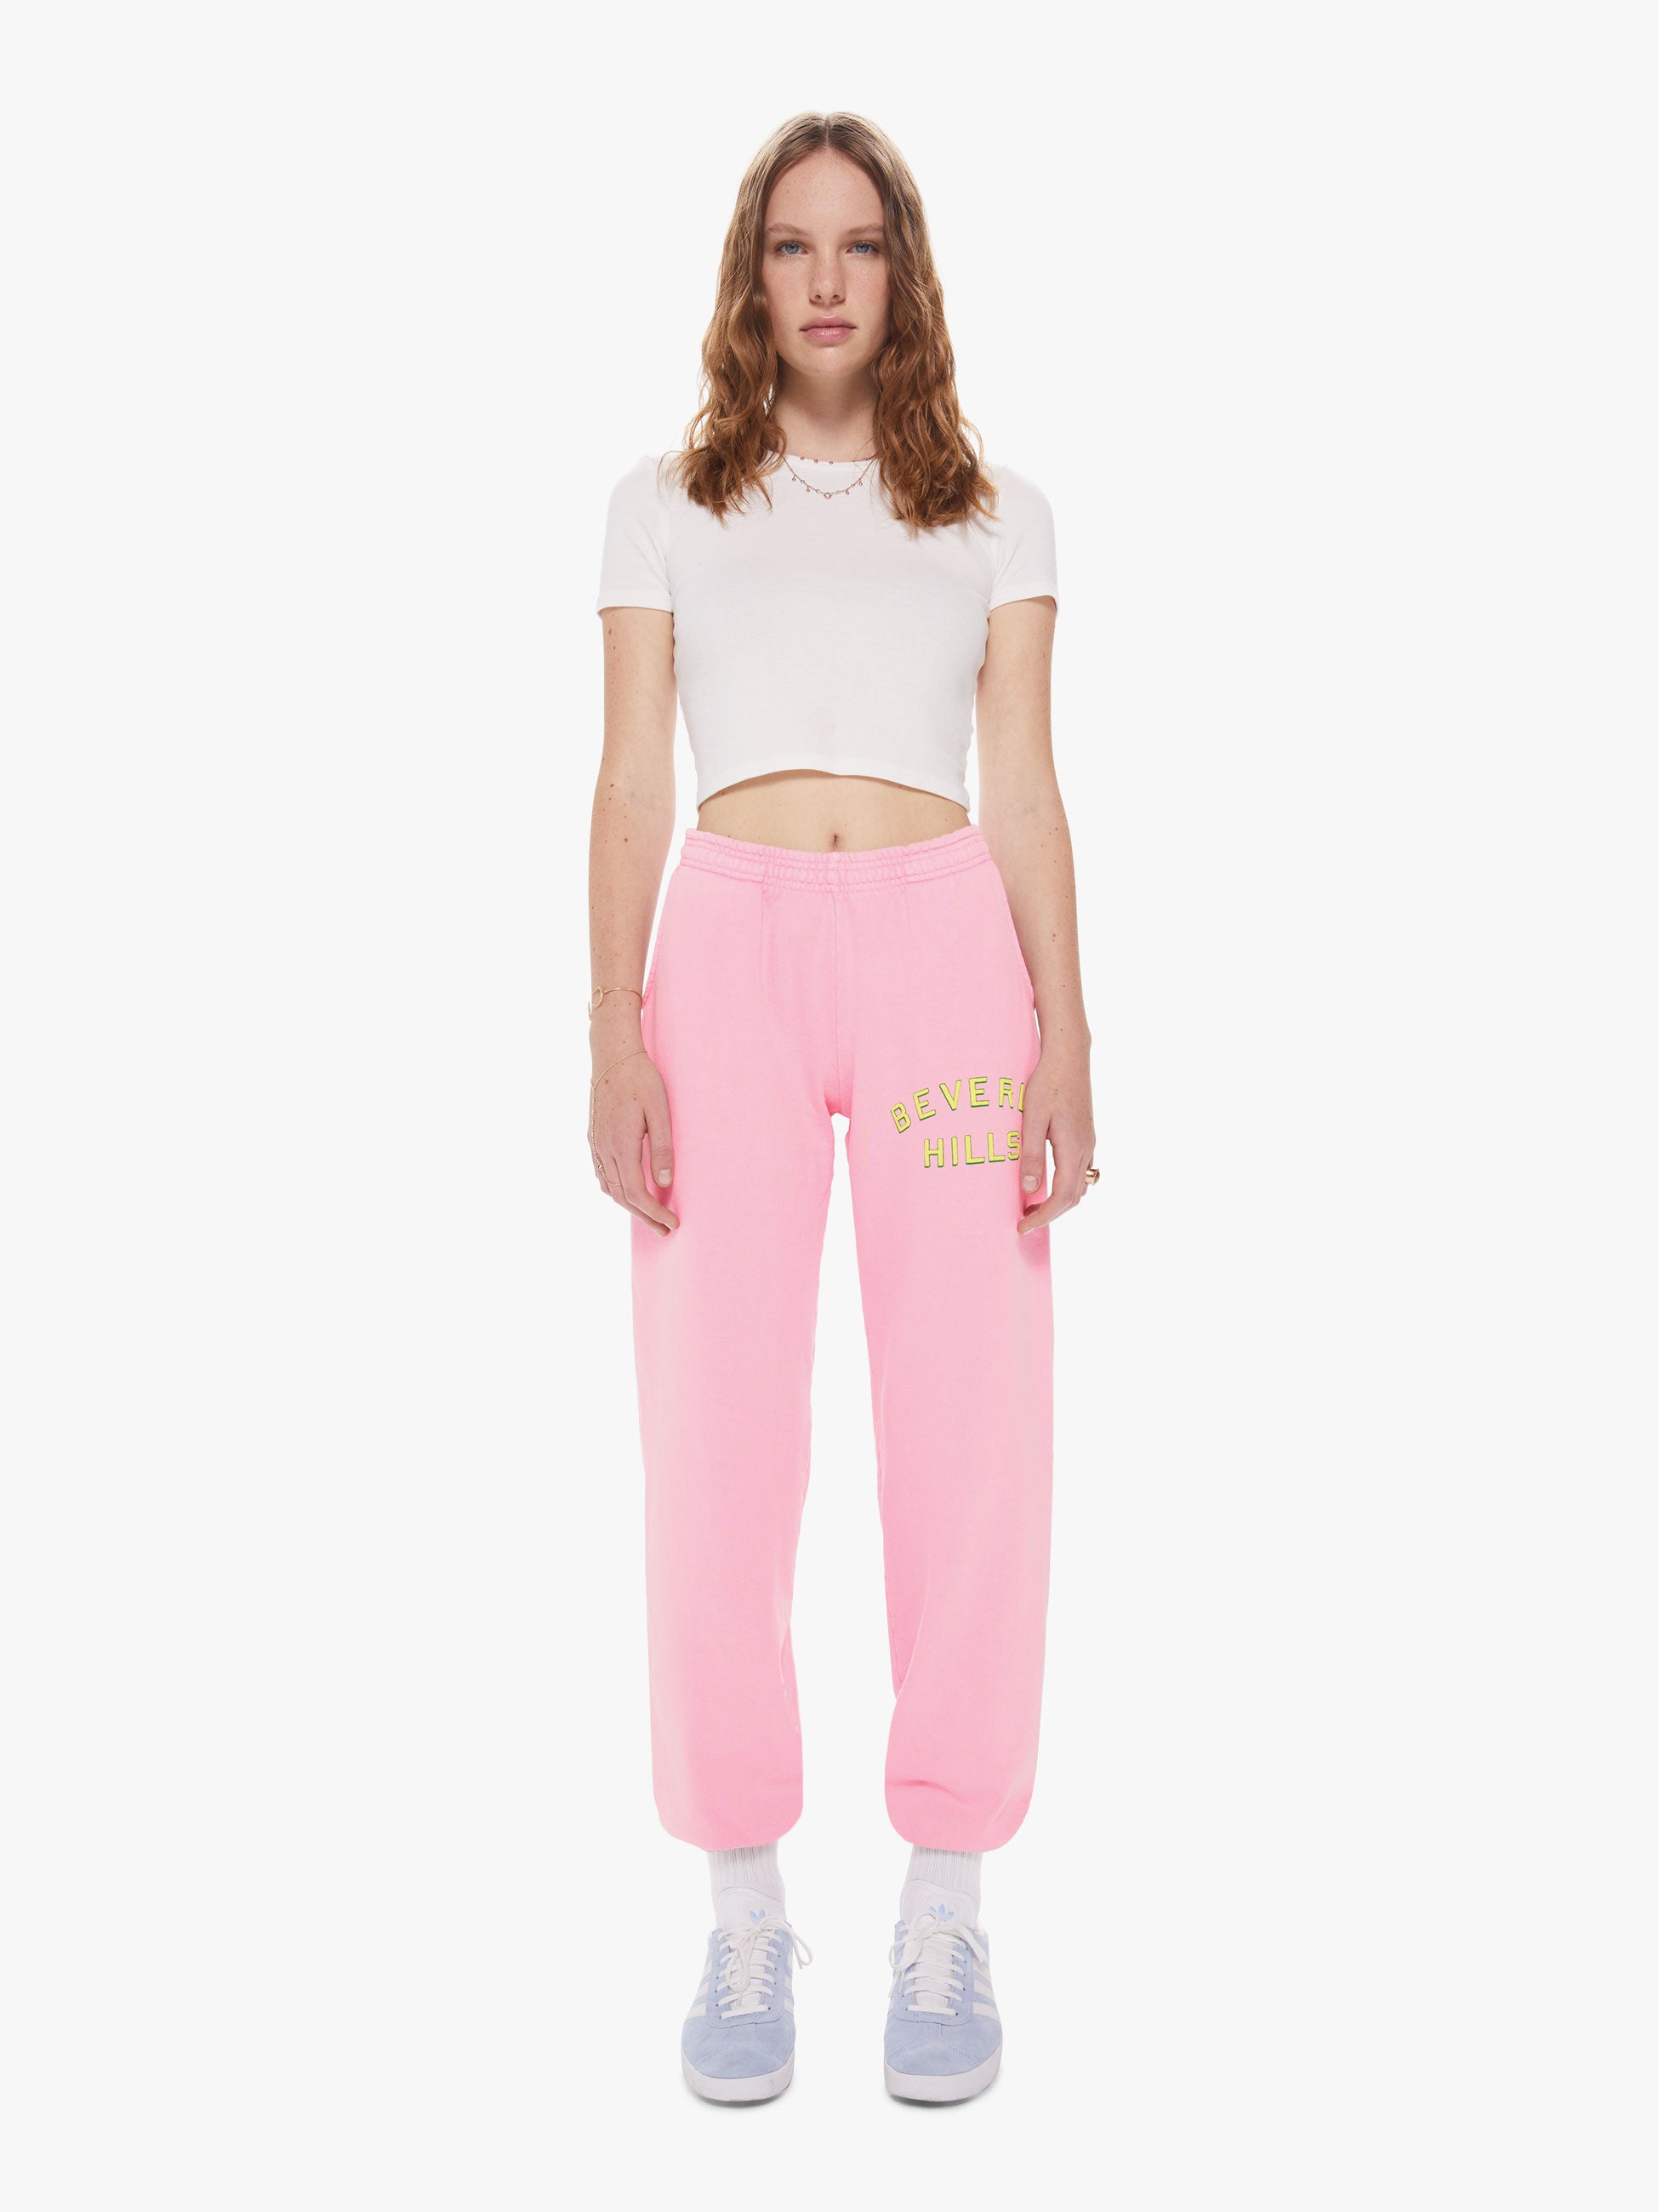 Pink Track pants and sweatpants for Women